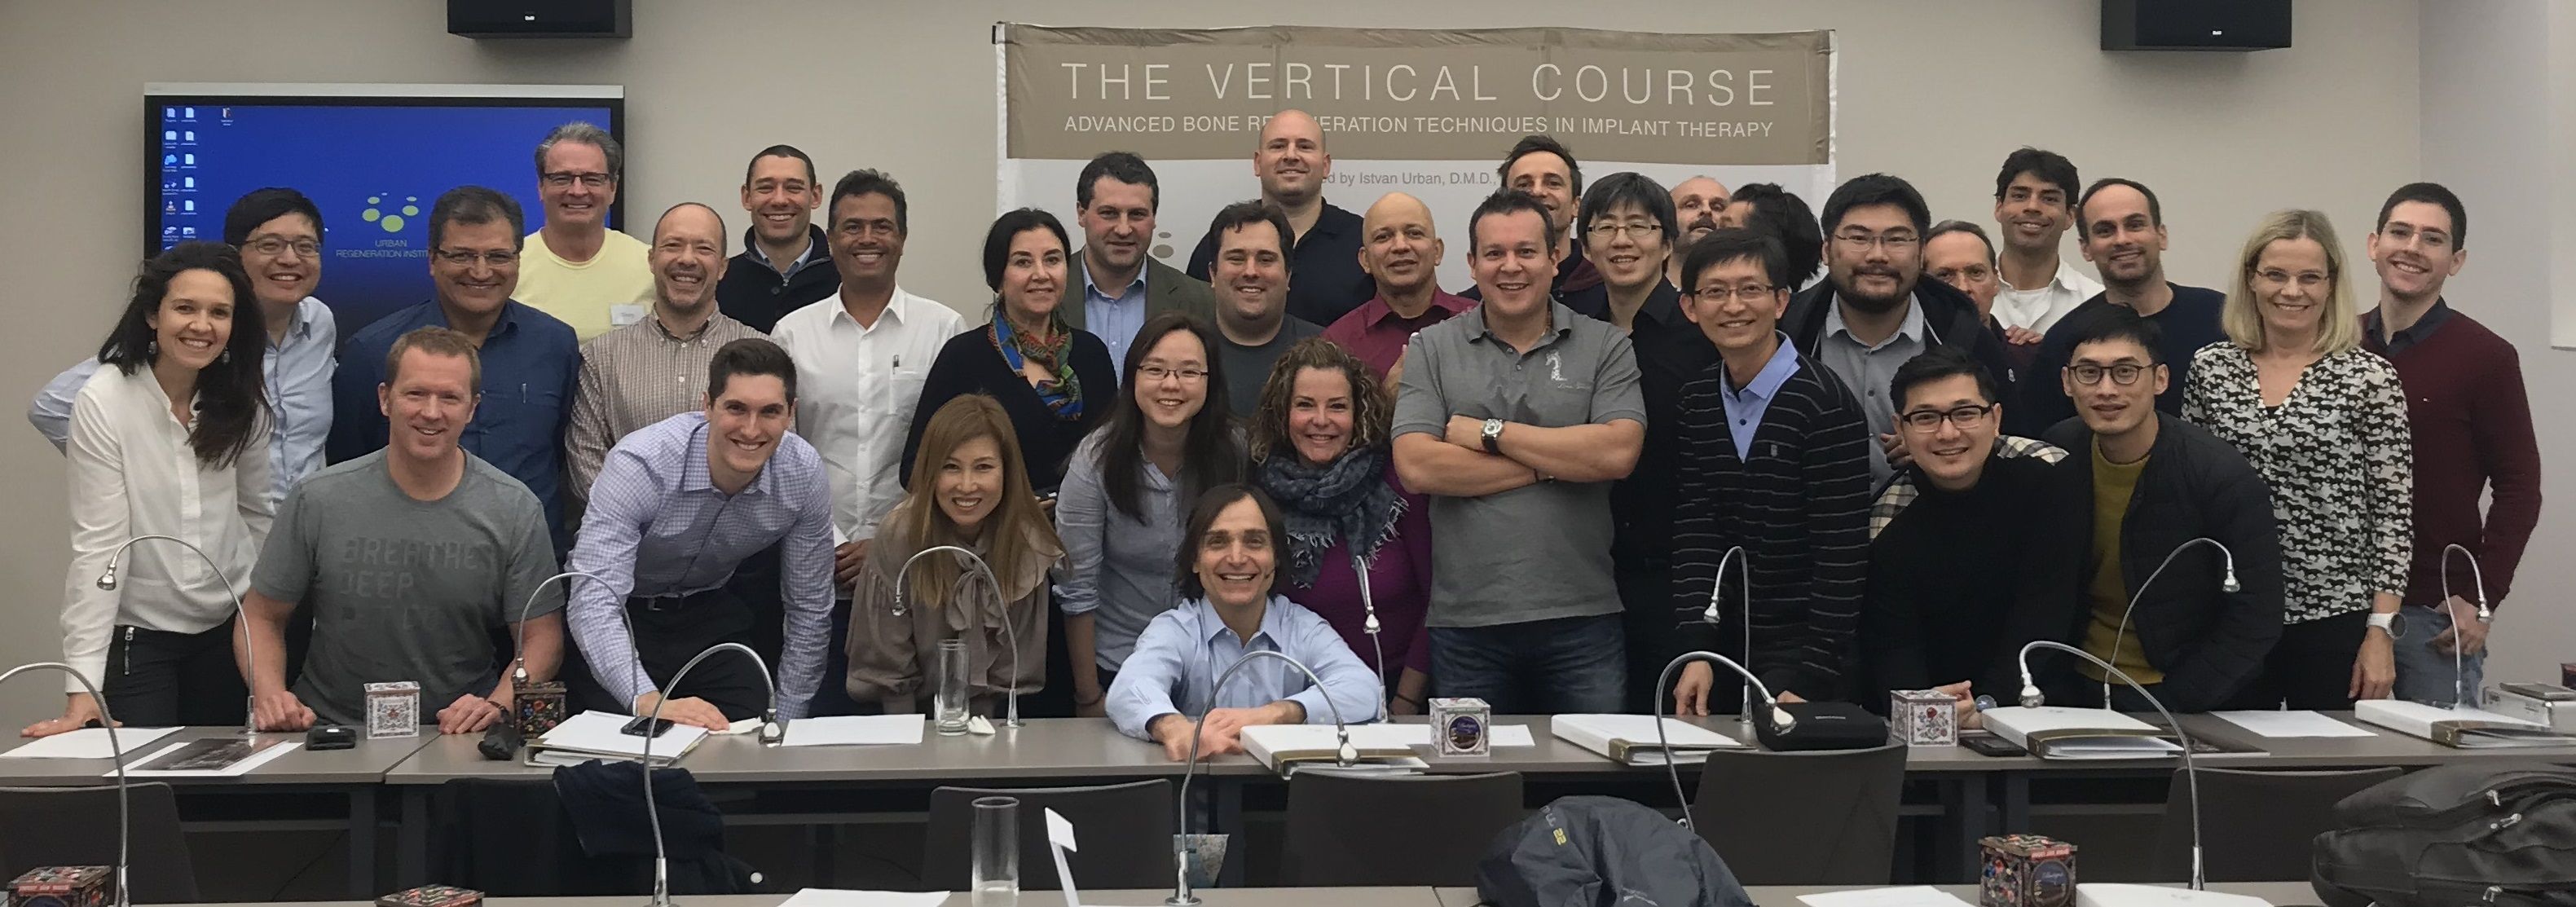 Dr. Cross at The Vertical Course